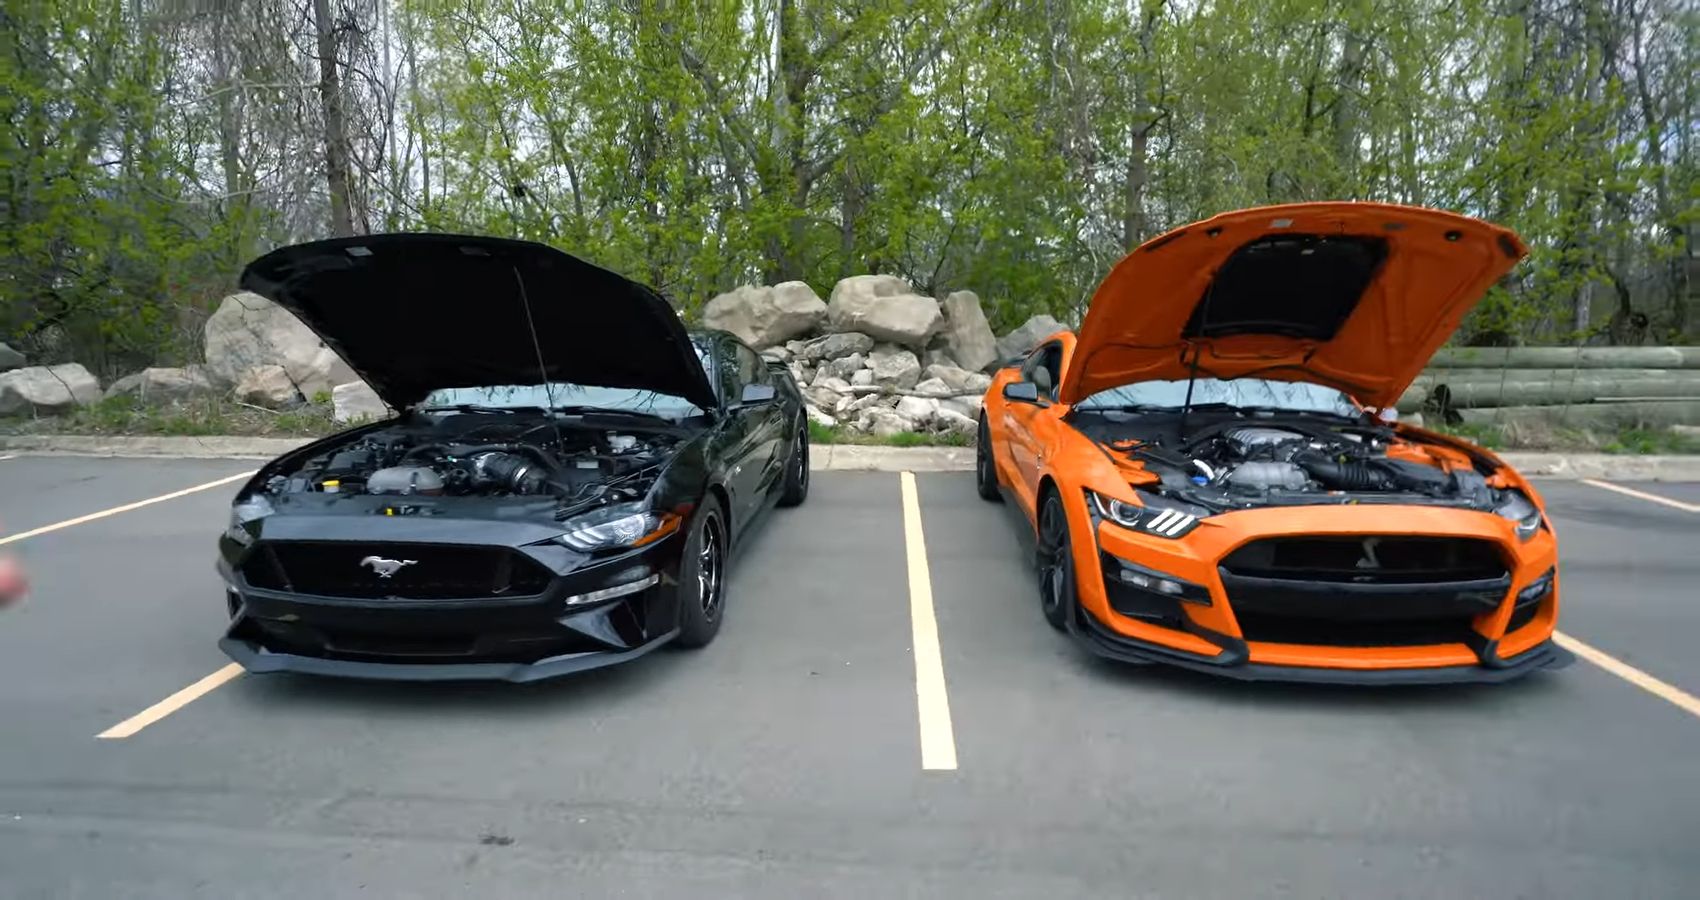 An orange Shelby GT500 and a Black Mustang GT 